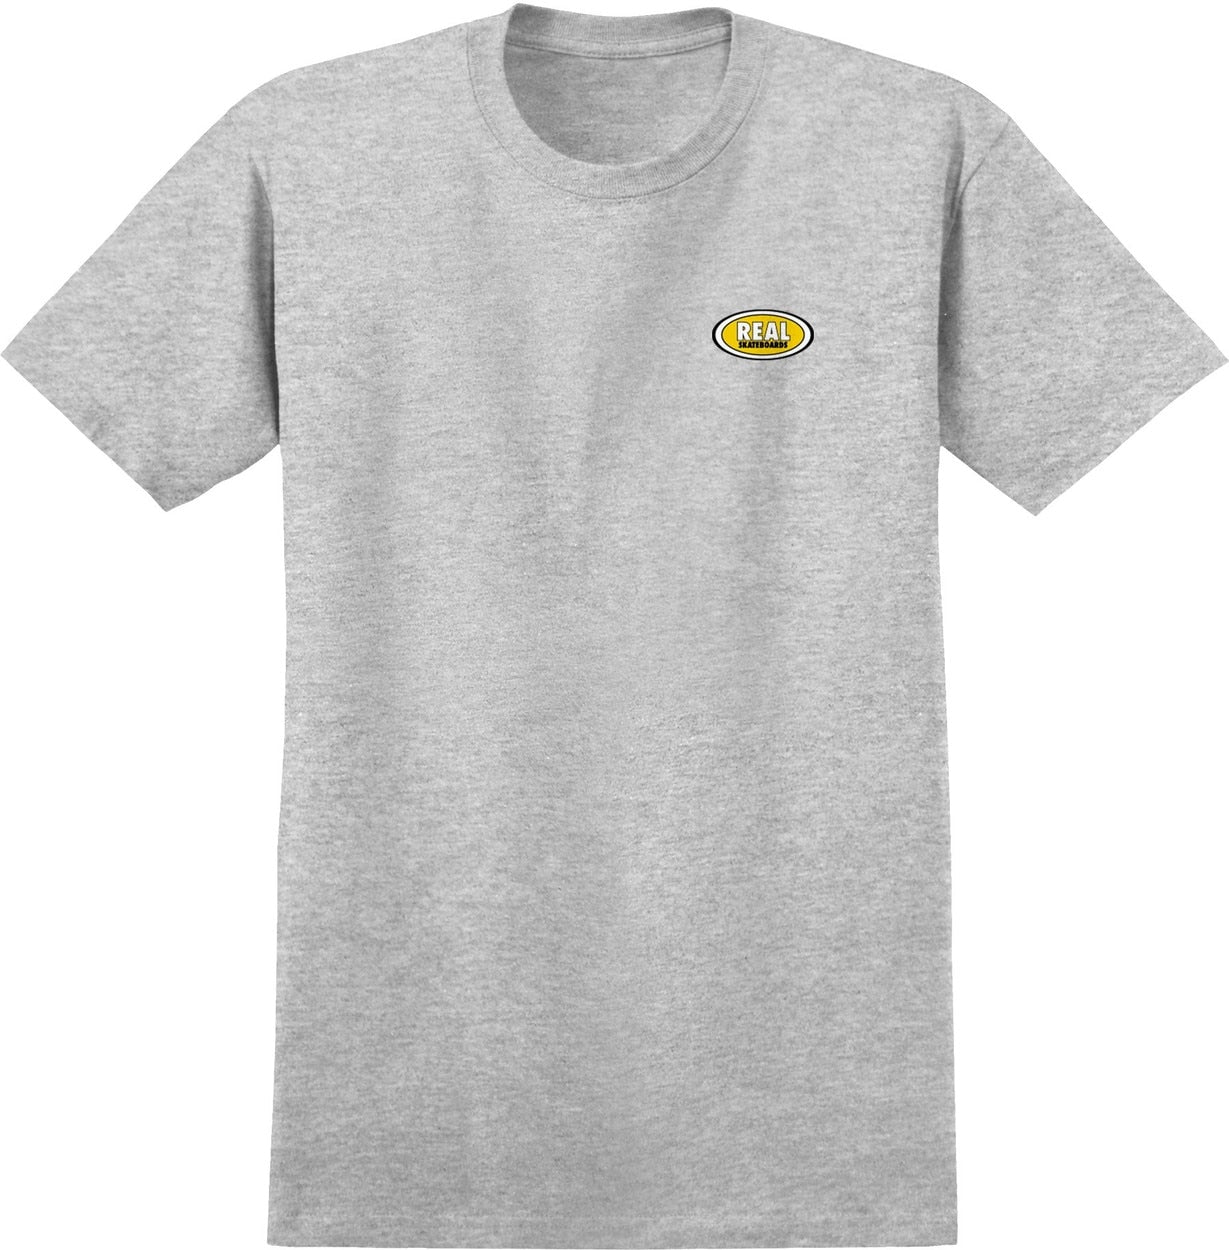 Real Small Oval Tee - Grey Heather/Yellow